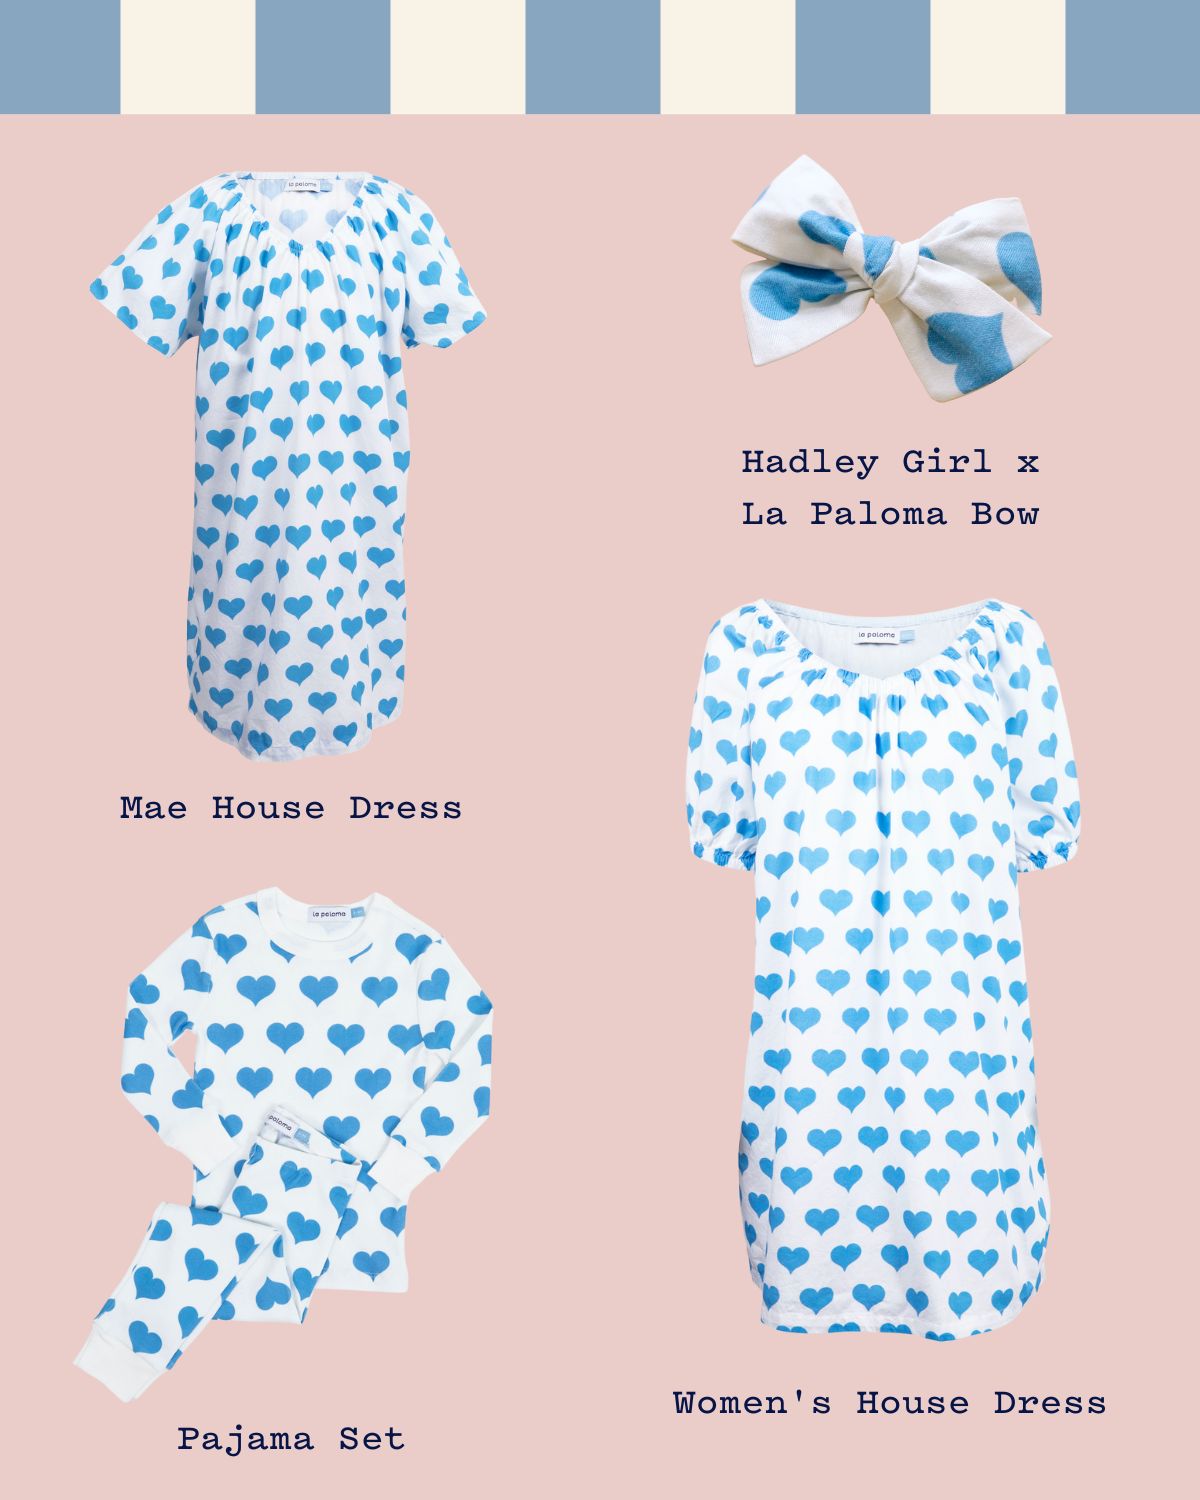 Blue Hearts Collection of Pajamas and House Dresses